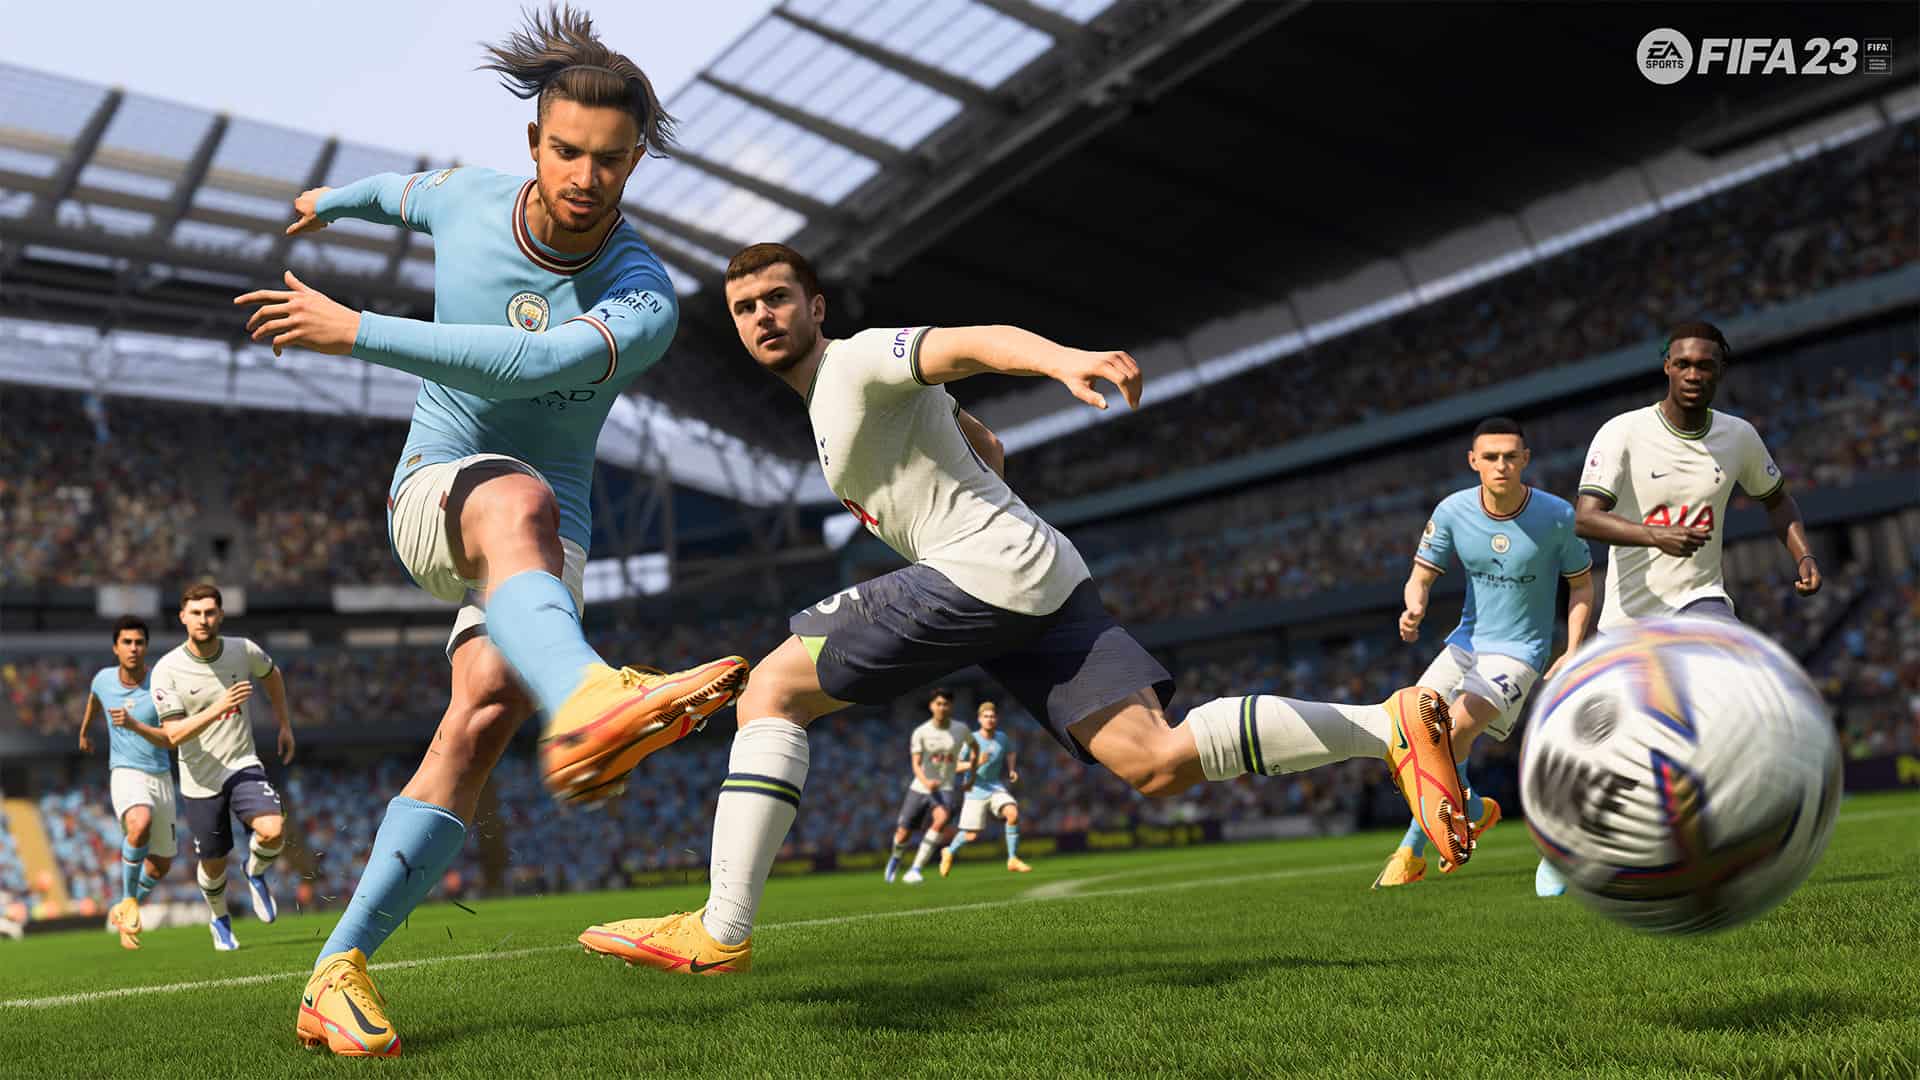 UPDATED* FIFA 23 Web App and Companion App - release date and